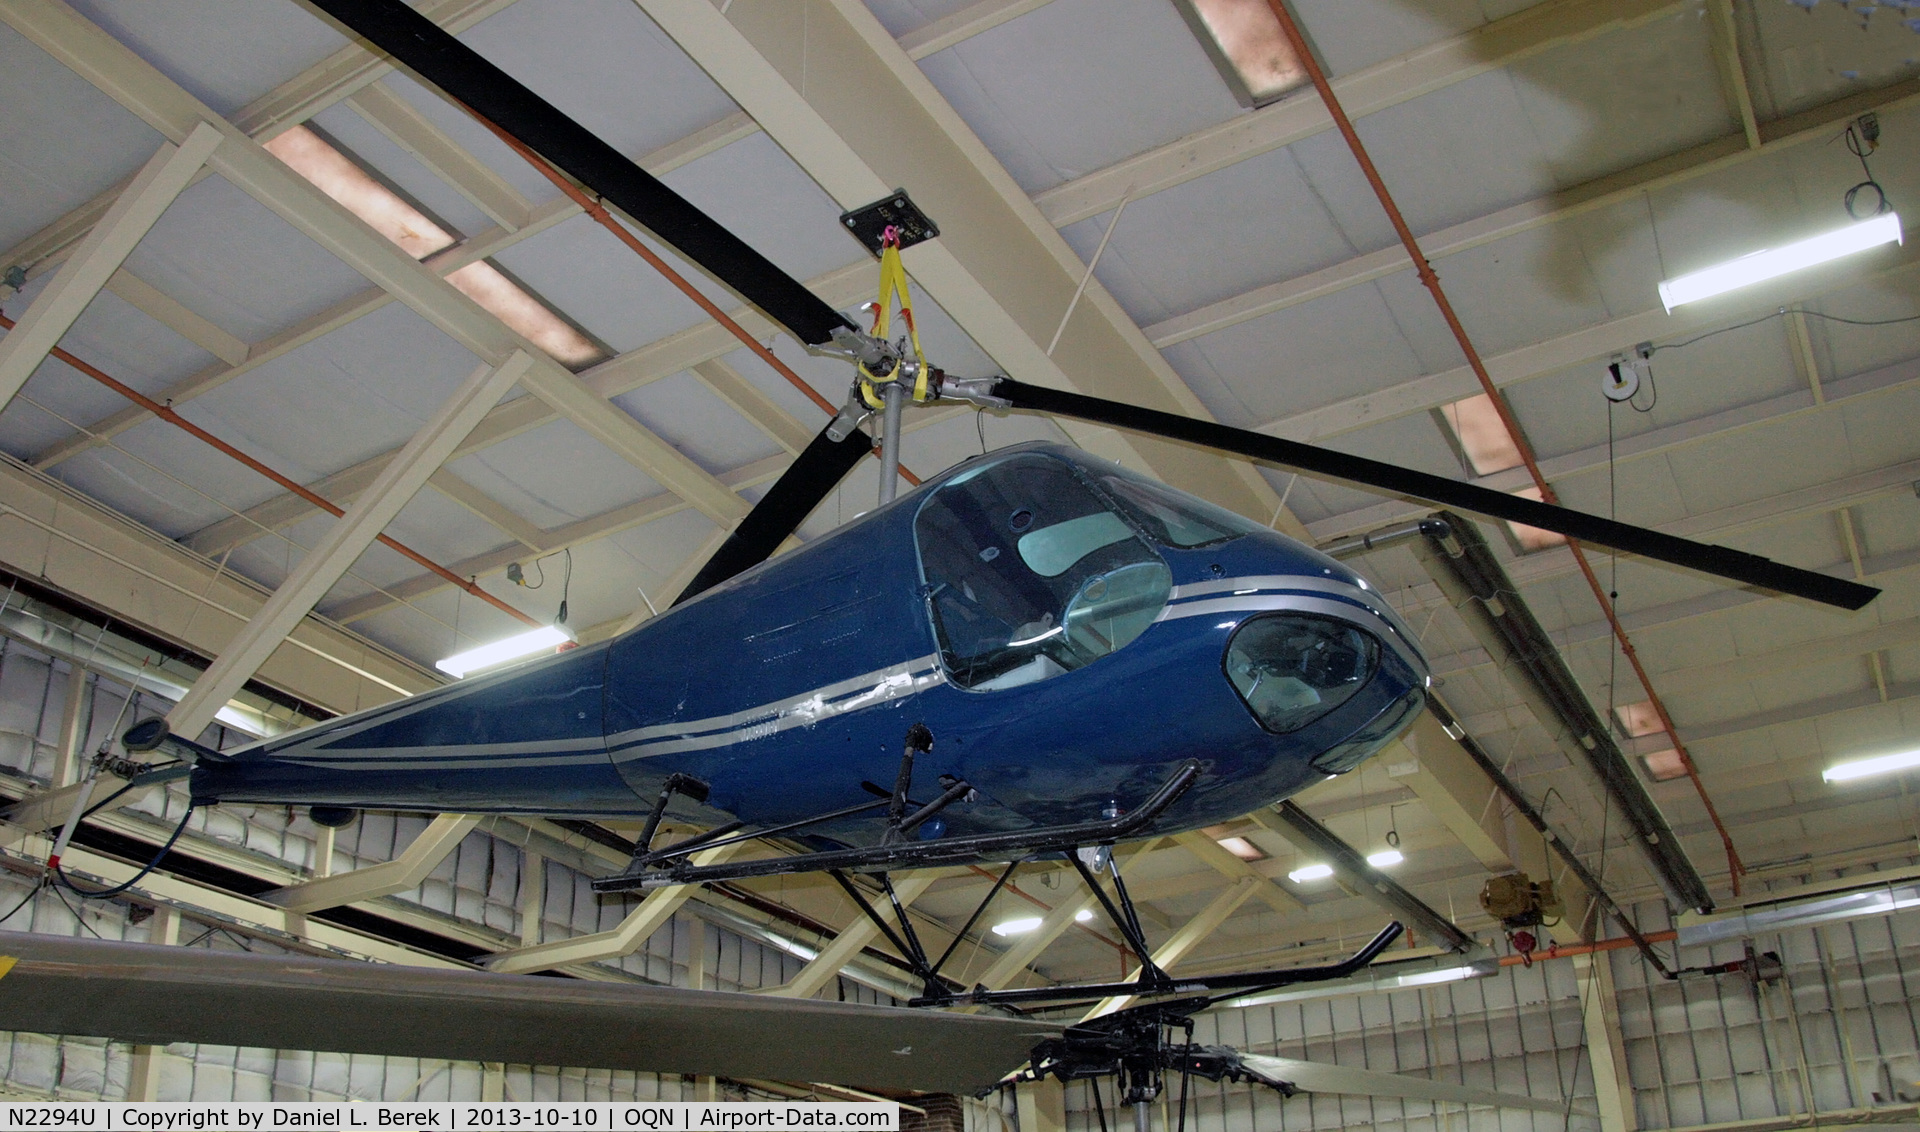 N2294U, 1967 Brantly B-2B C/N 467, This beauty is not on display at the American Helicopter Museum for all to admire.